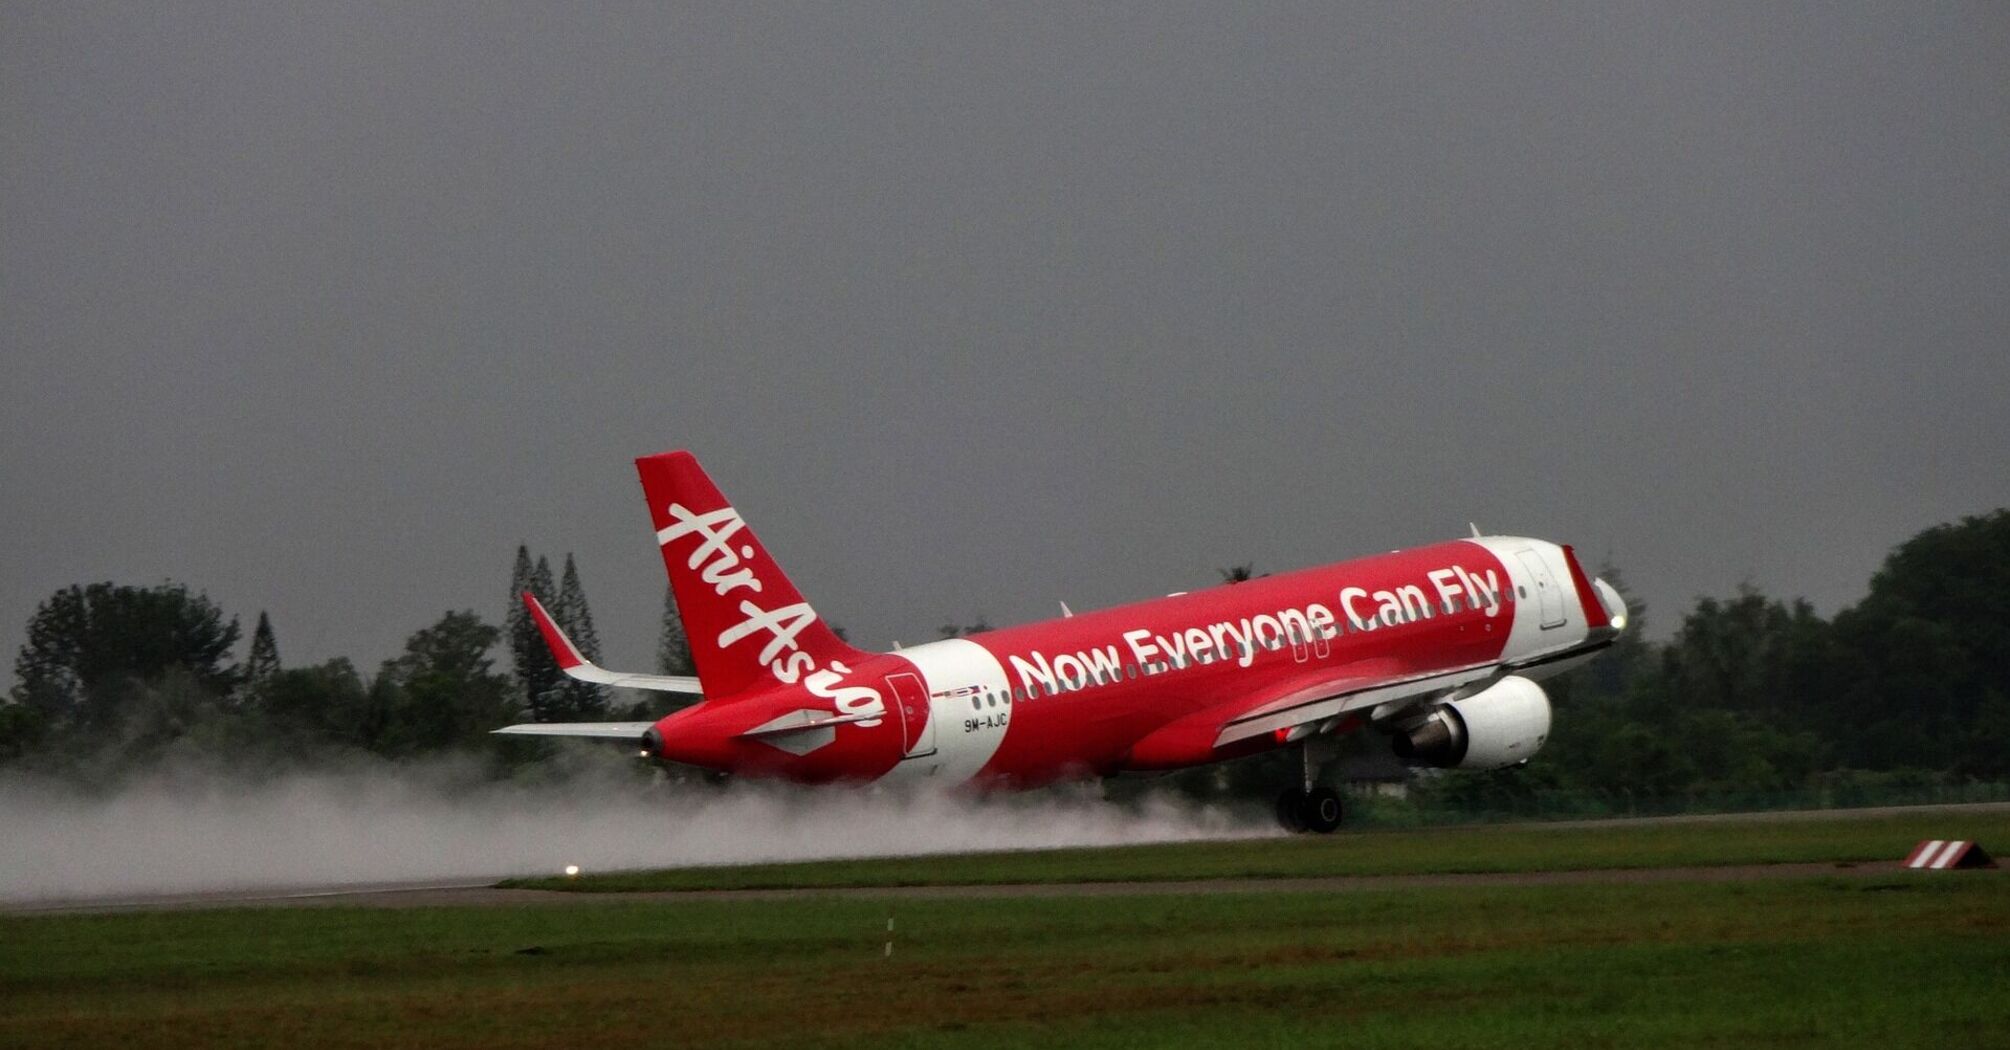 AirAsia aircraft taking off on a wet runway